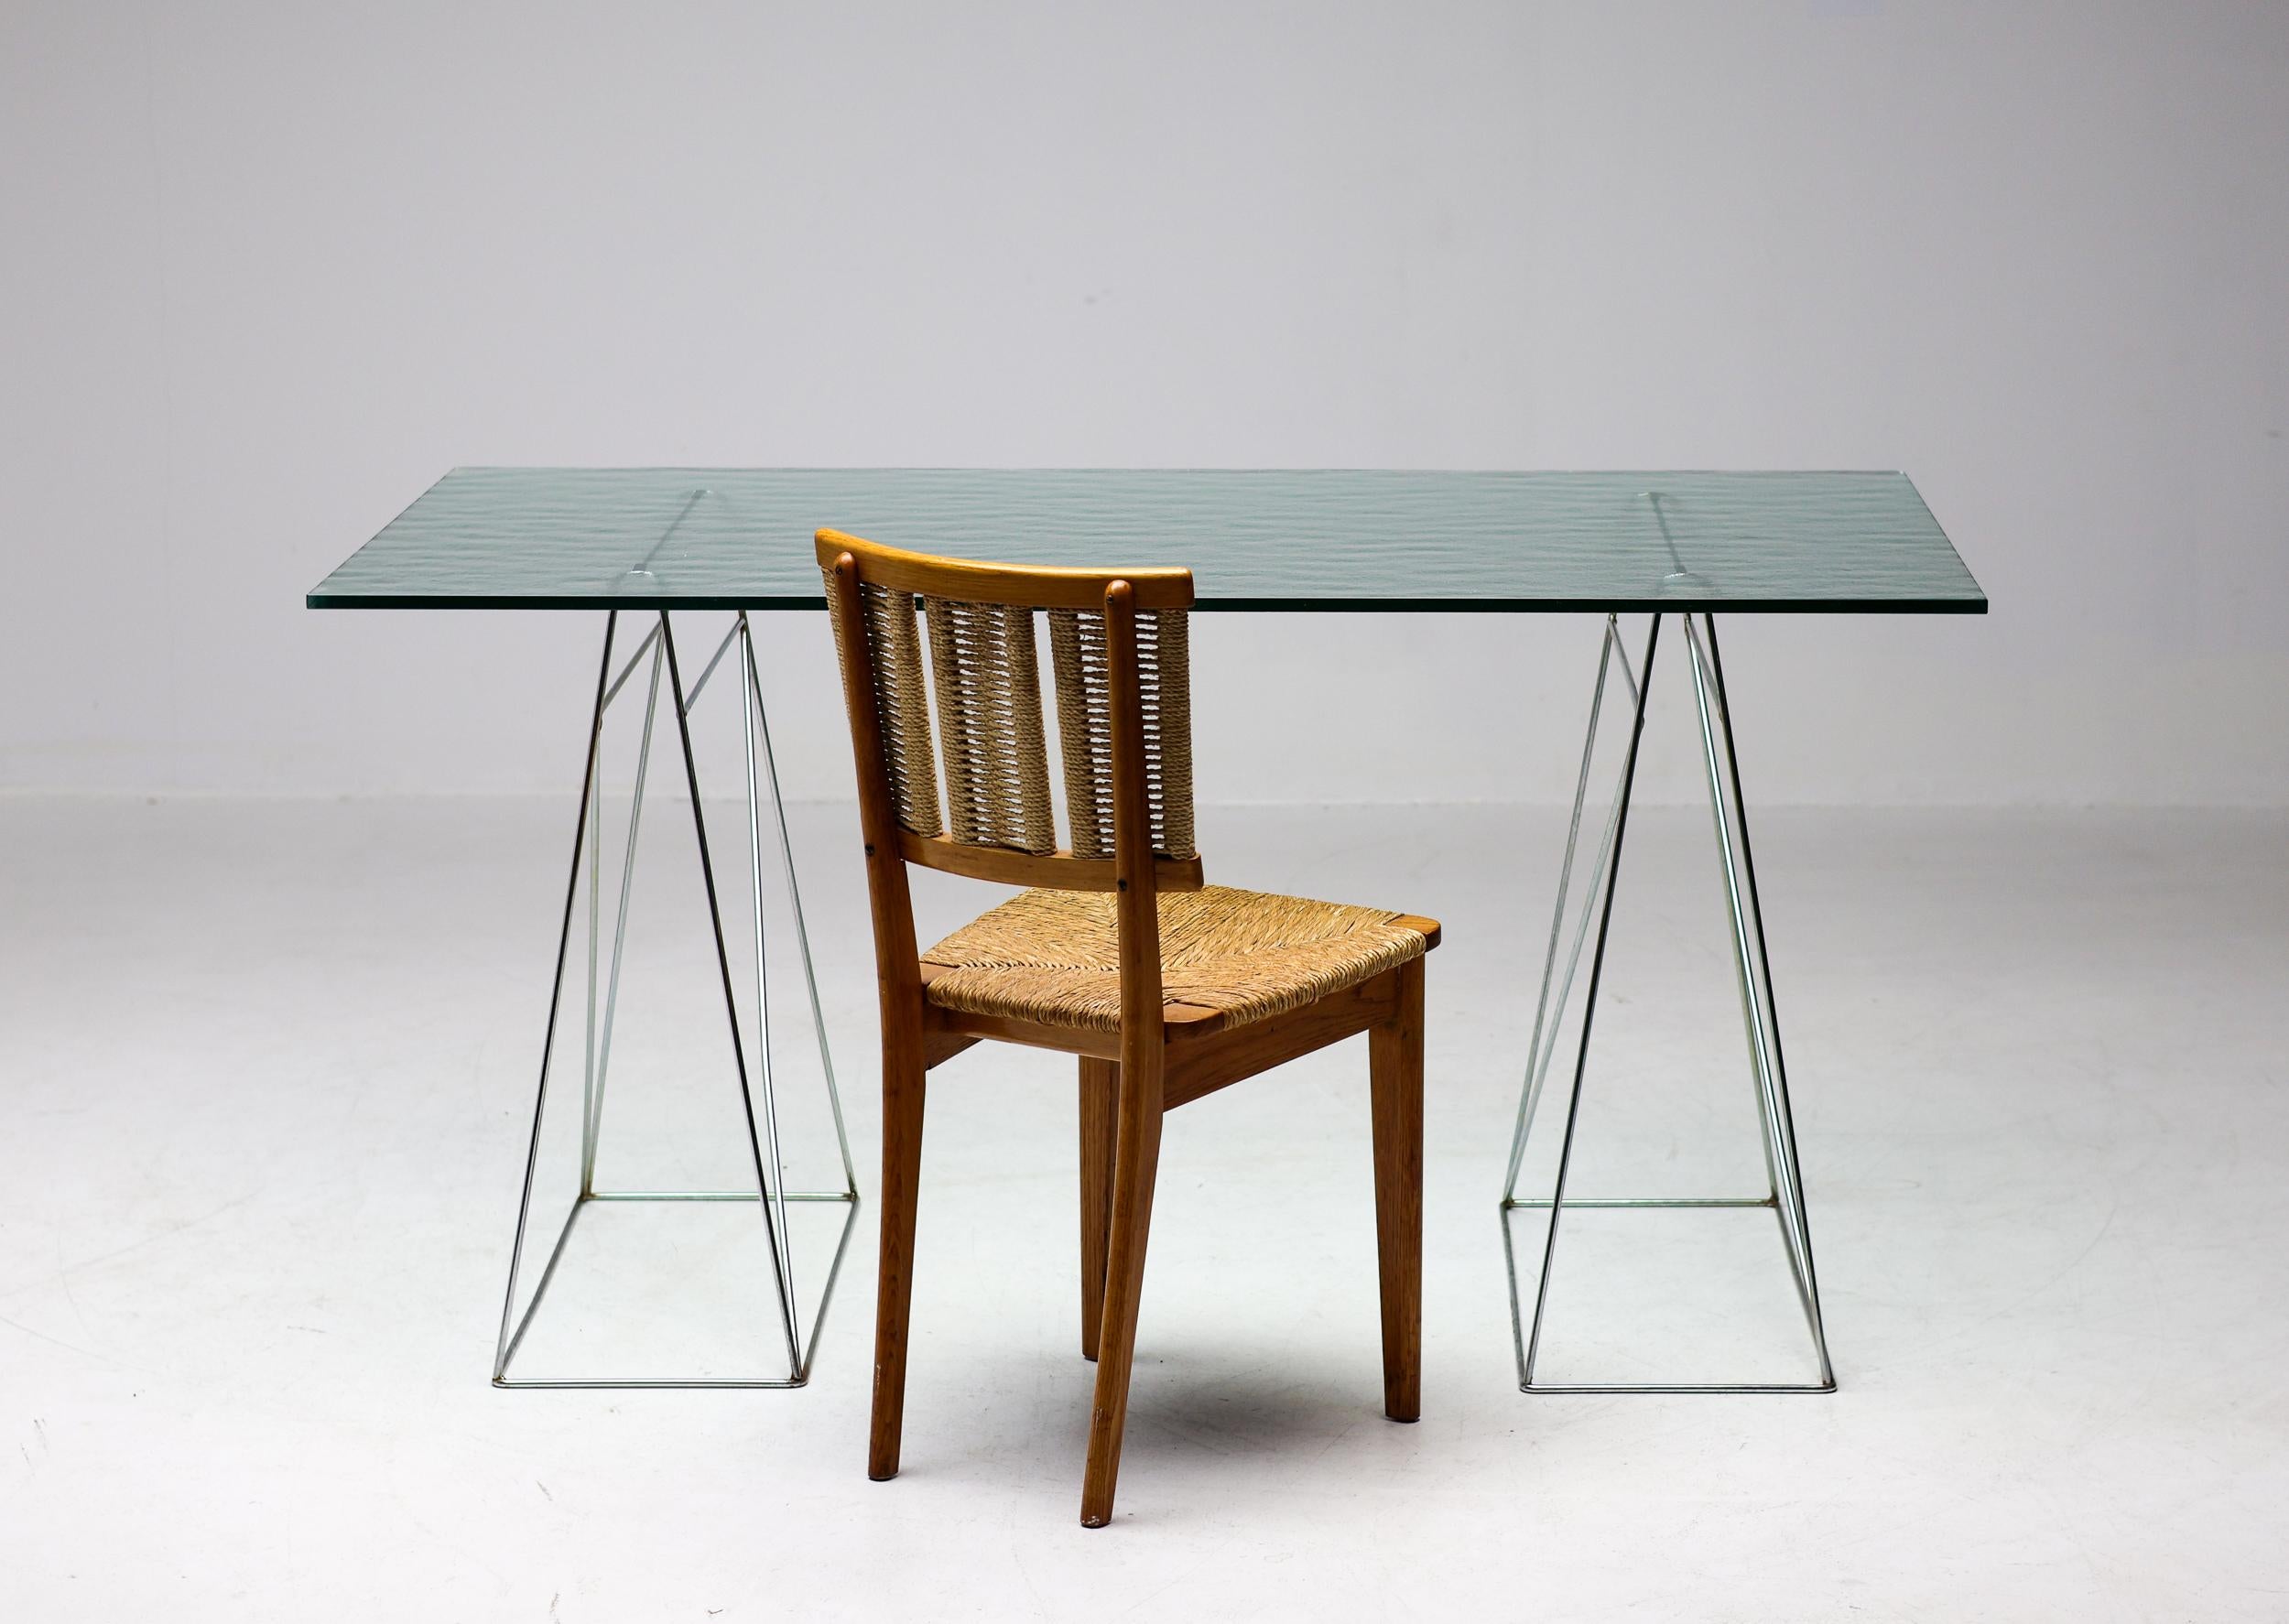 Graceful compact desk designed by French designer Olivier Mourgue.
Unique example executed with a shortened textured crystal top manufactured by Cassina for the Le Corbusier LC6 table.
An ideal piece for any modern apartment, when needed it can